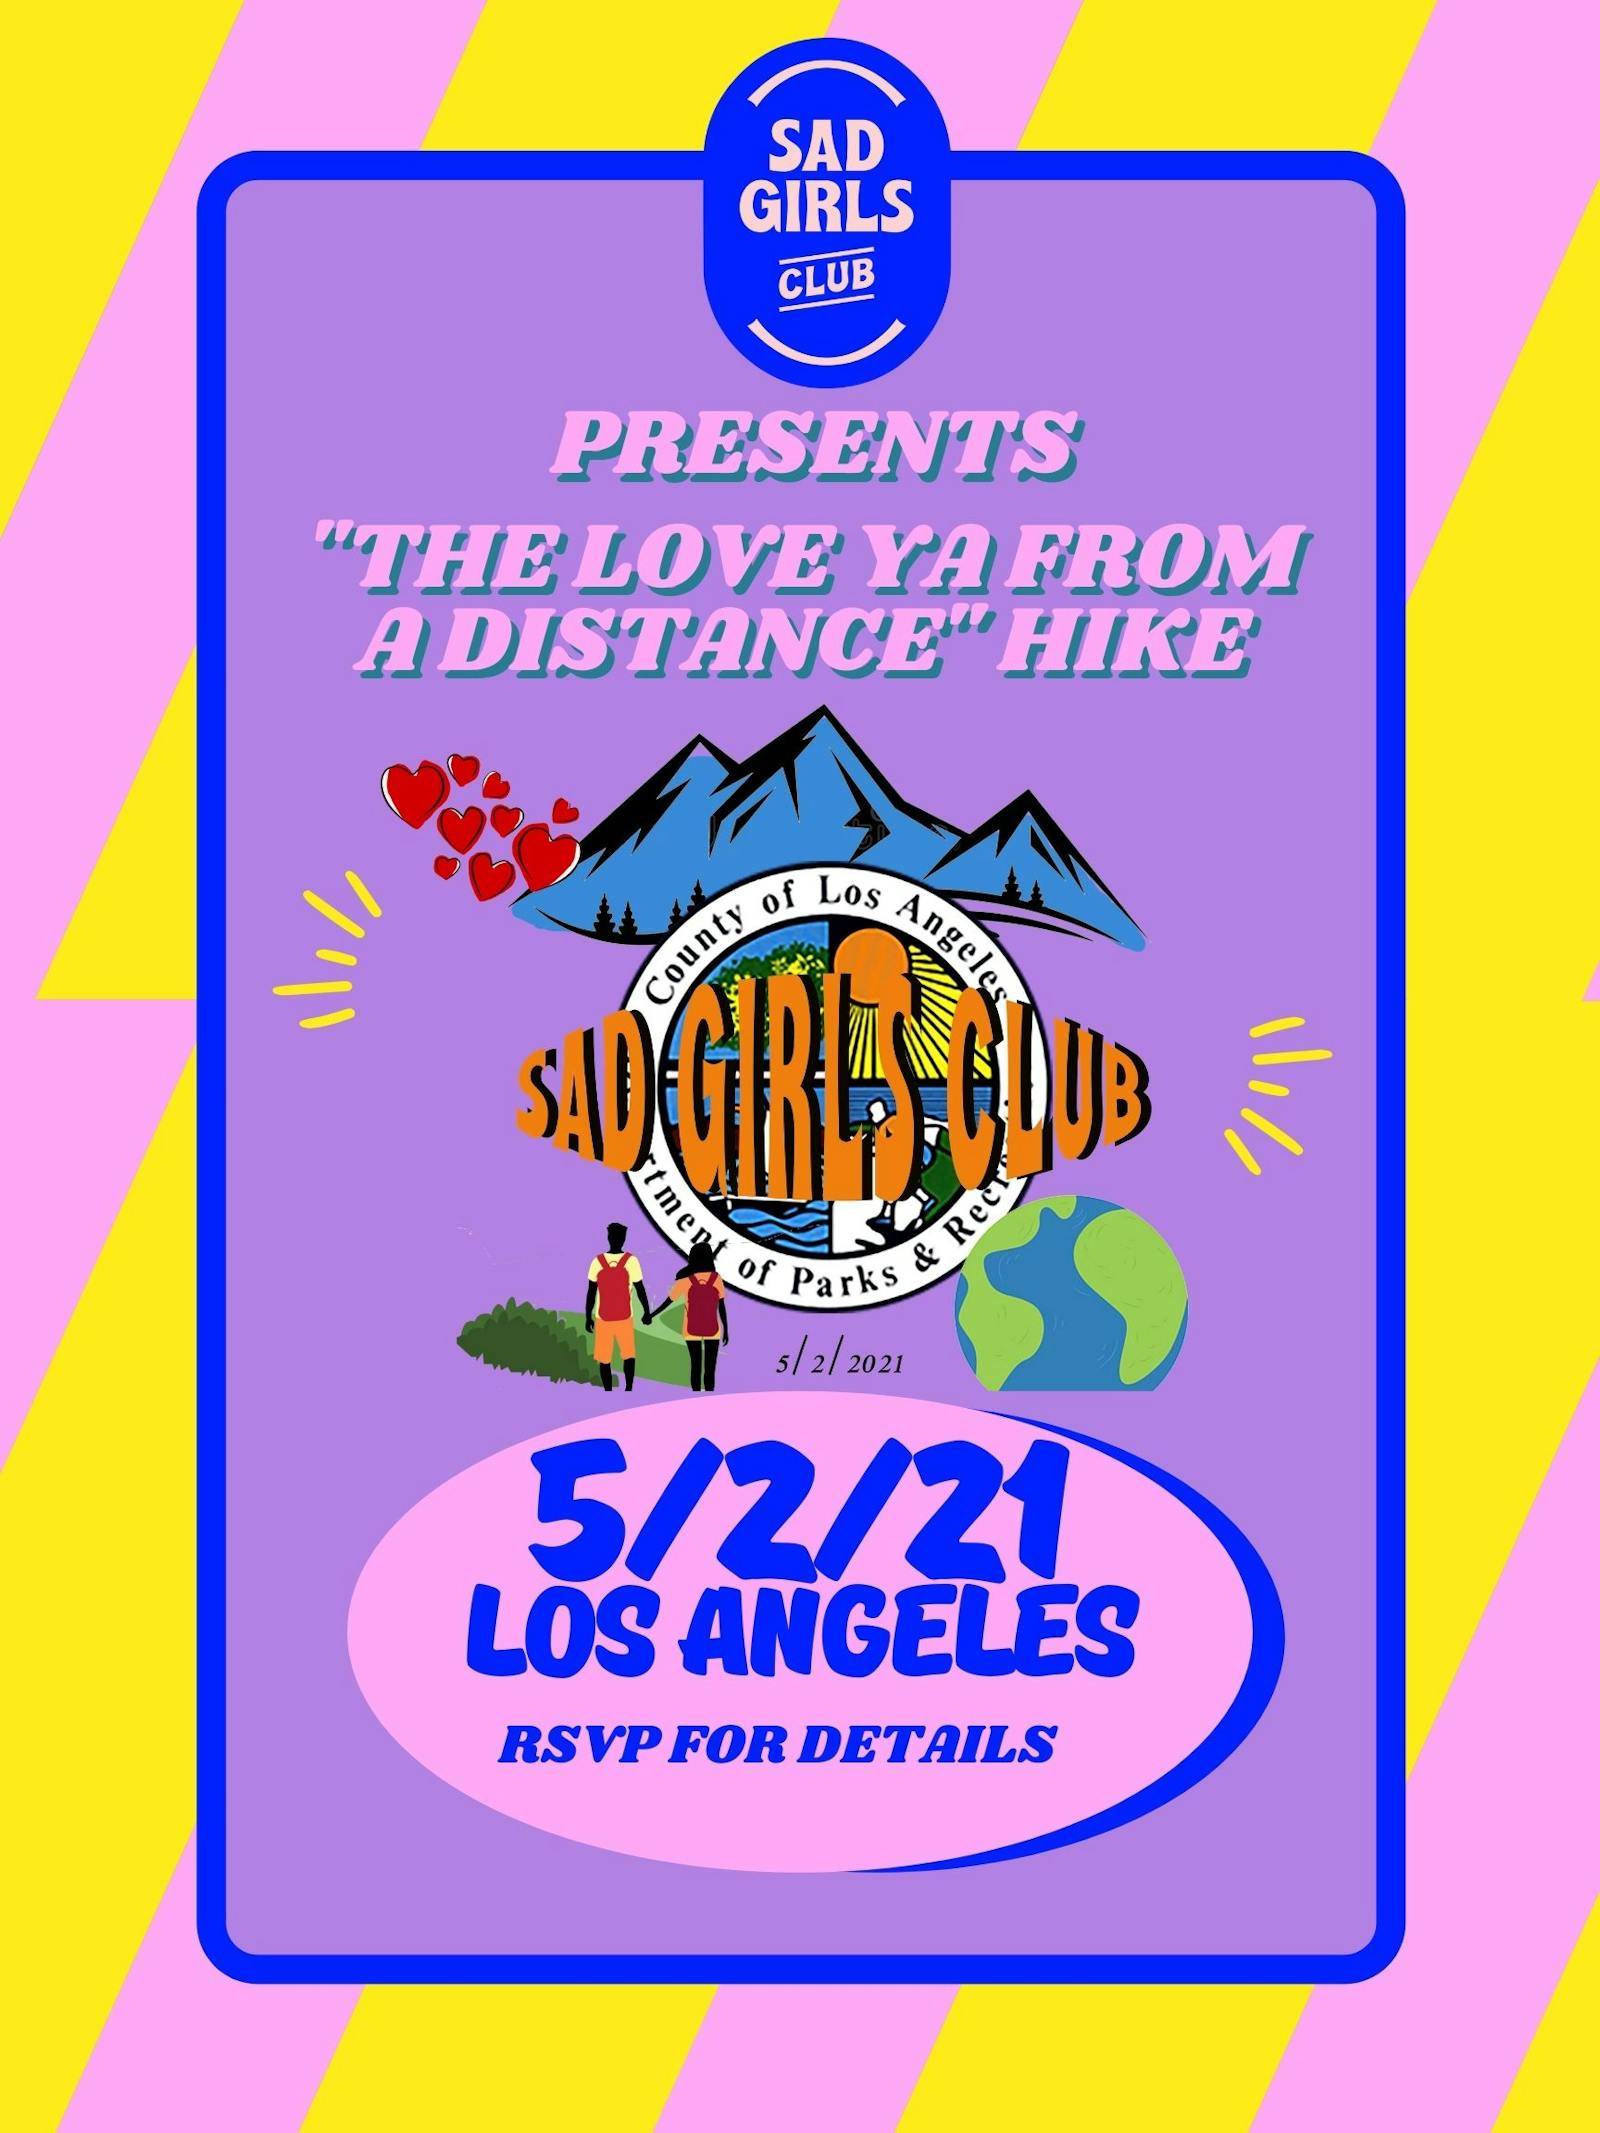 SGC Los Angeles! Join our 'Love ya From a Distance' Hike